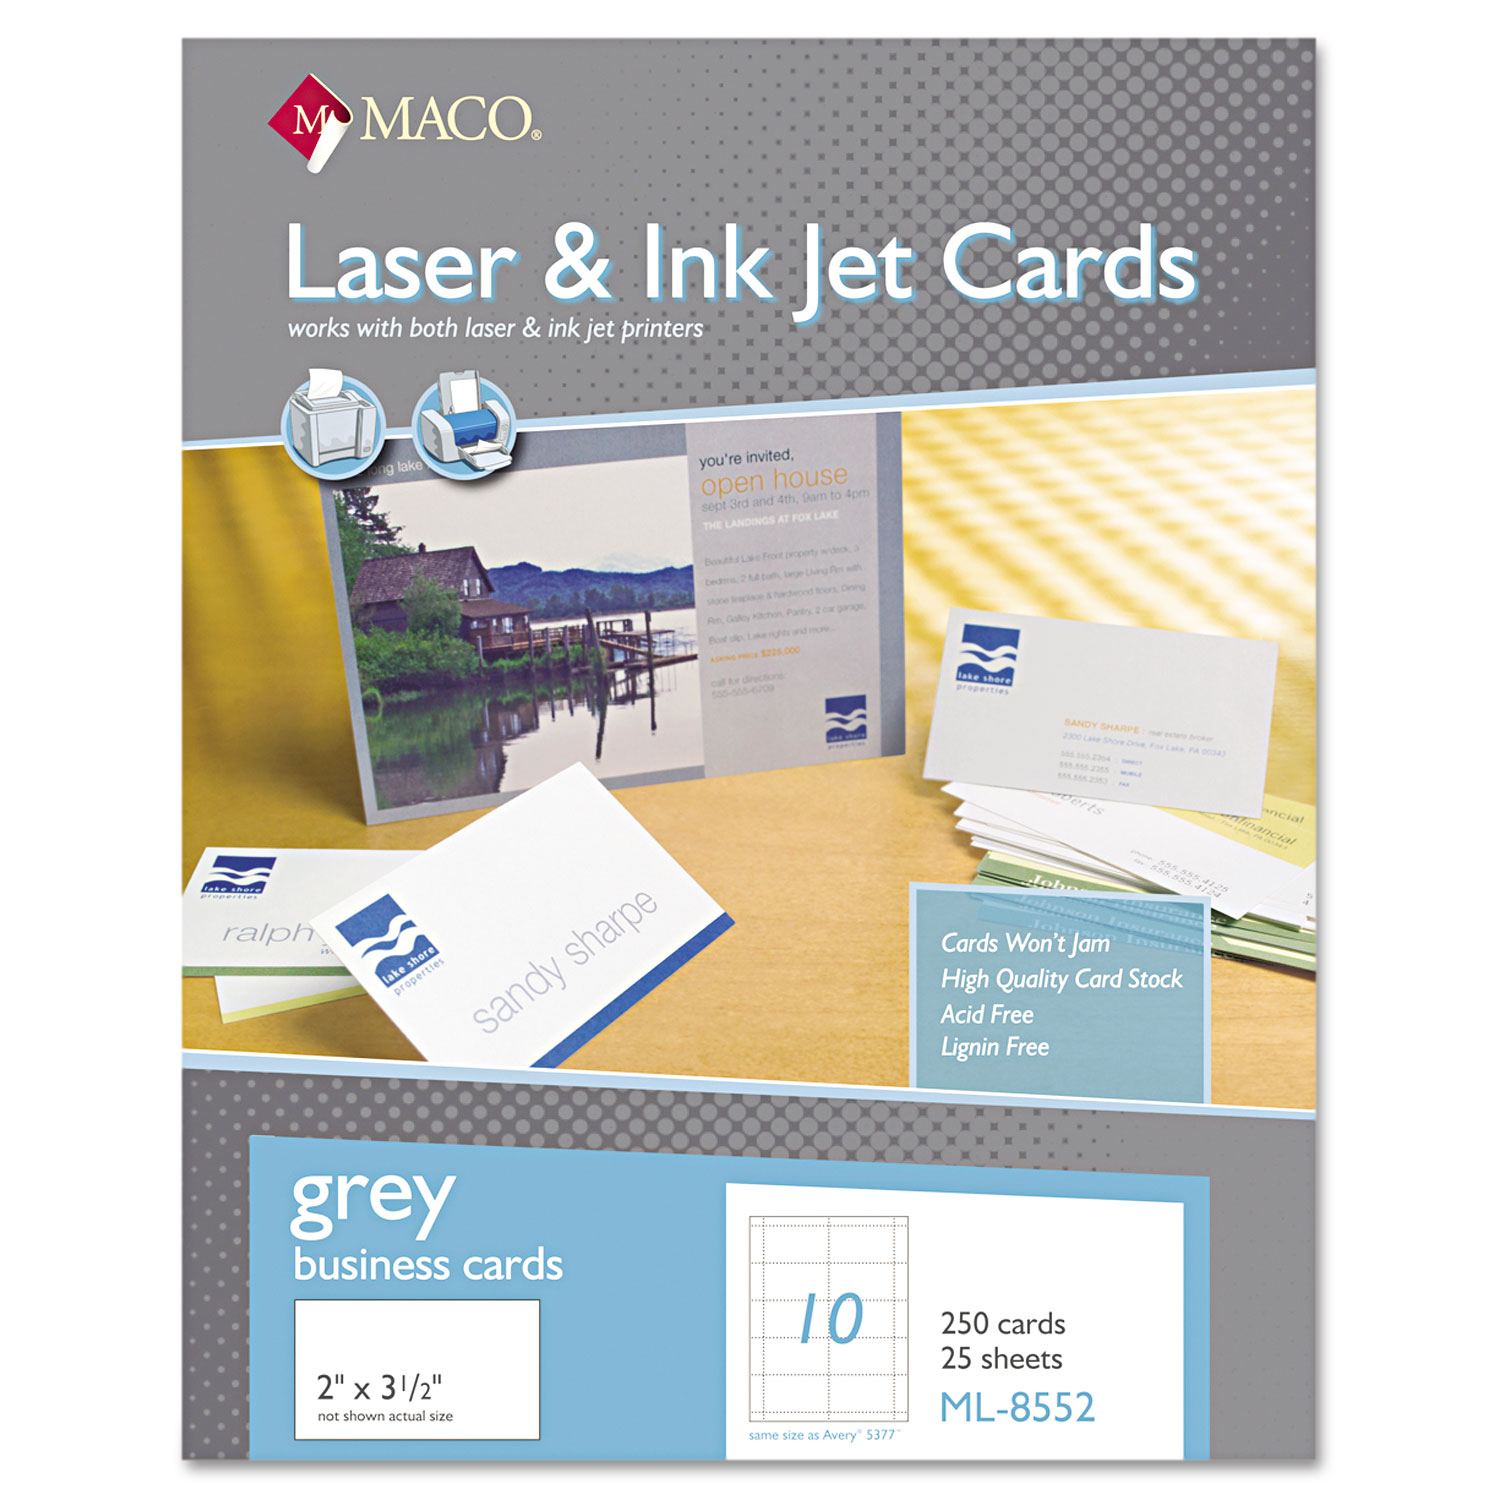 Microperforated Laser/Ink Jet Business Cards, 2 x 3 1/2, Gray, 250/Box